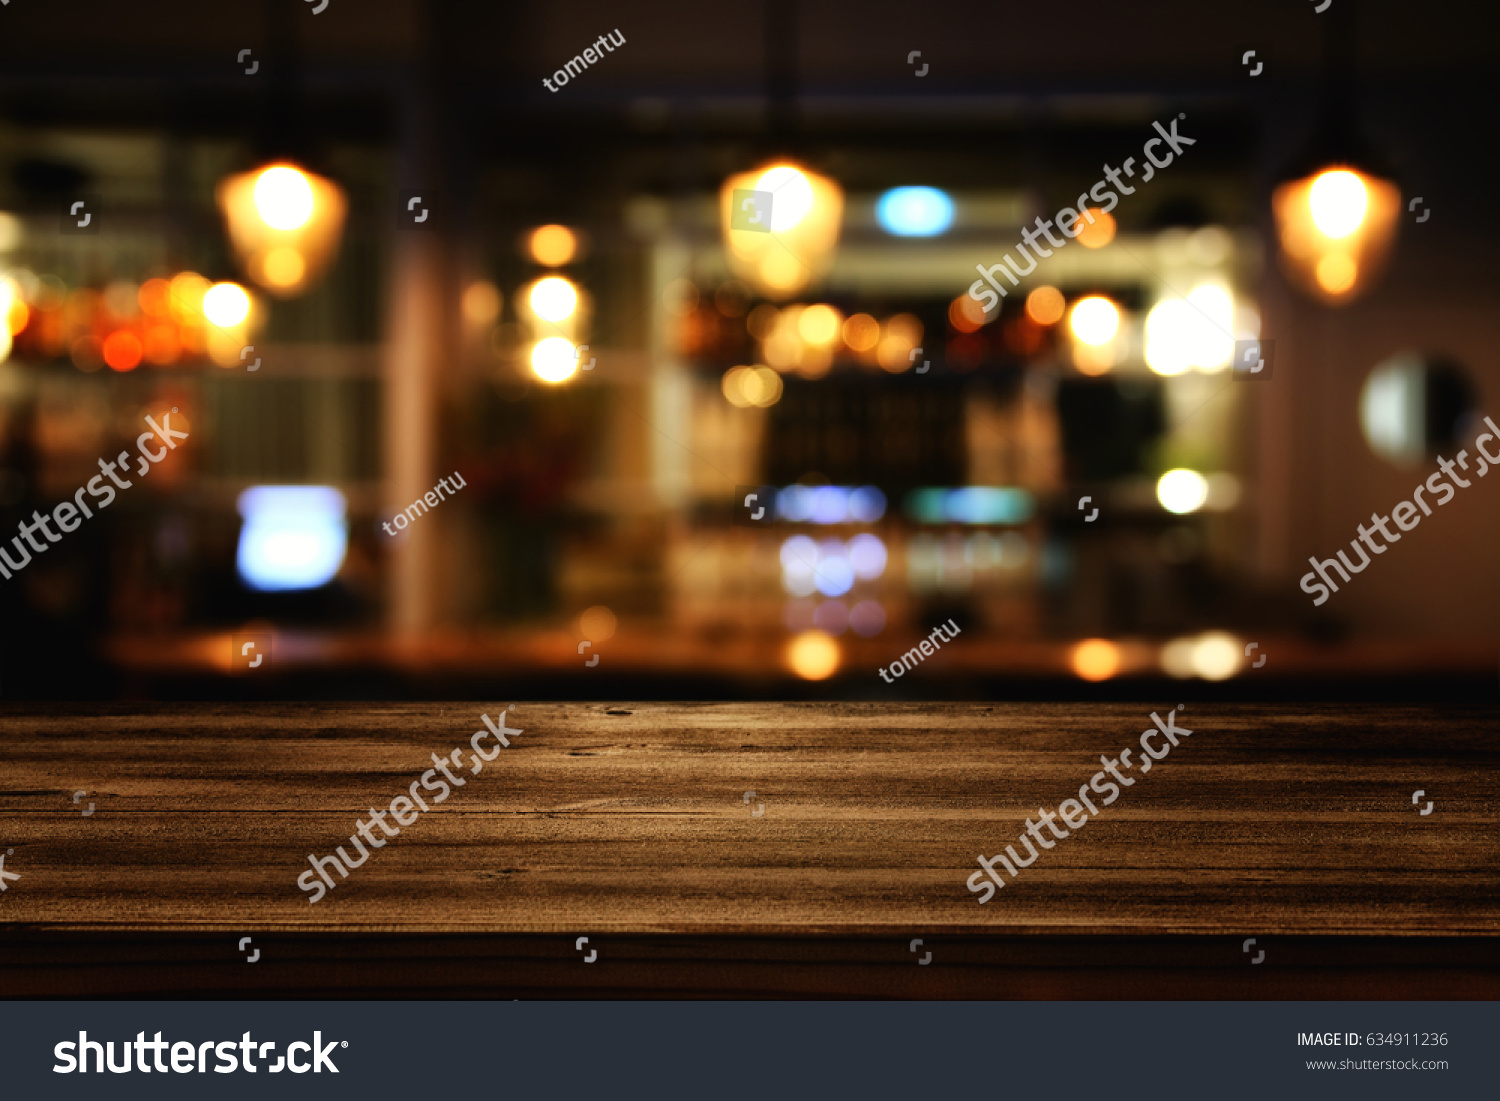 Image of wooden table in front of abstract blurred restaurant lights background. #634911236